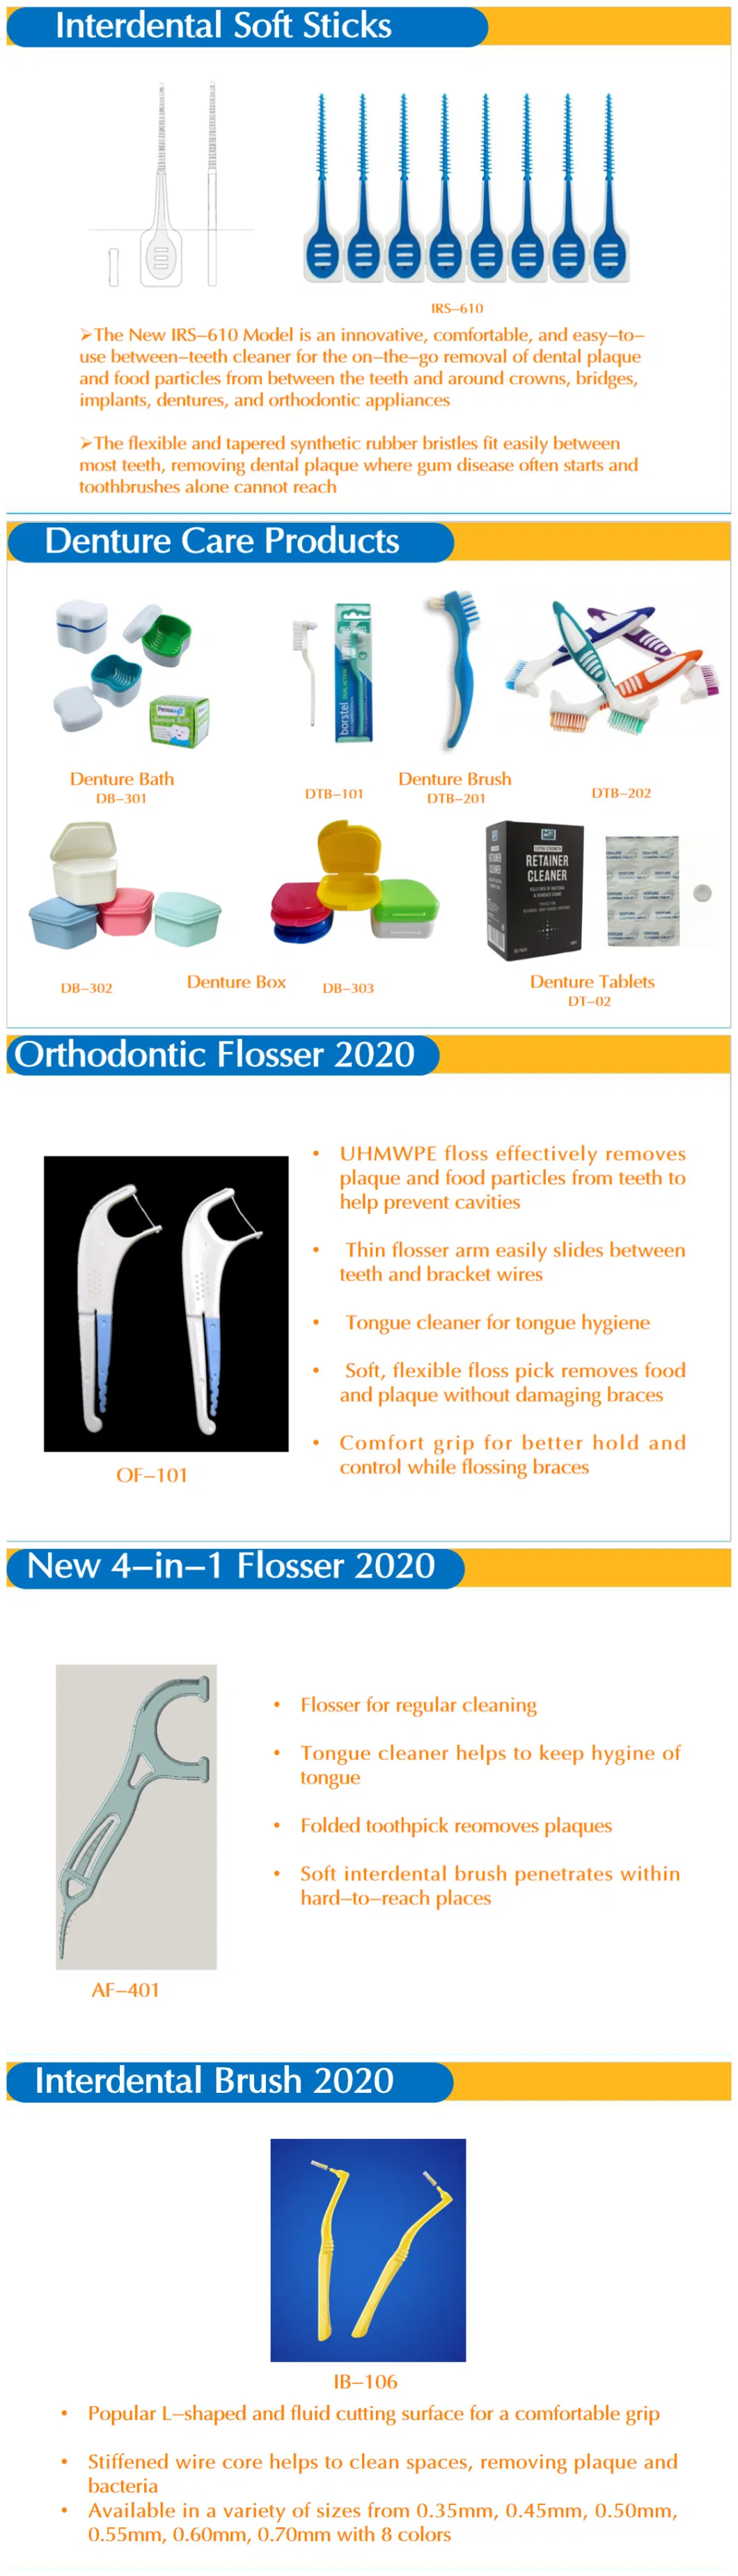 OEM Private Label Biodegradable Eco Friendly Dental Floss with Customized Paper Dispenser Package